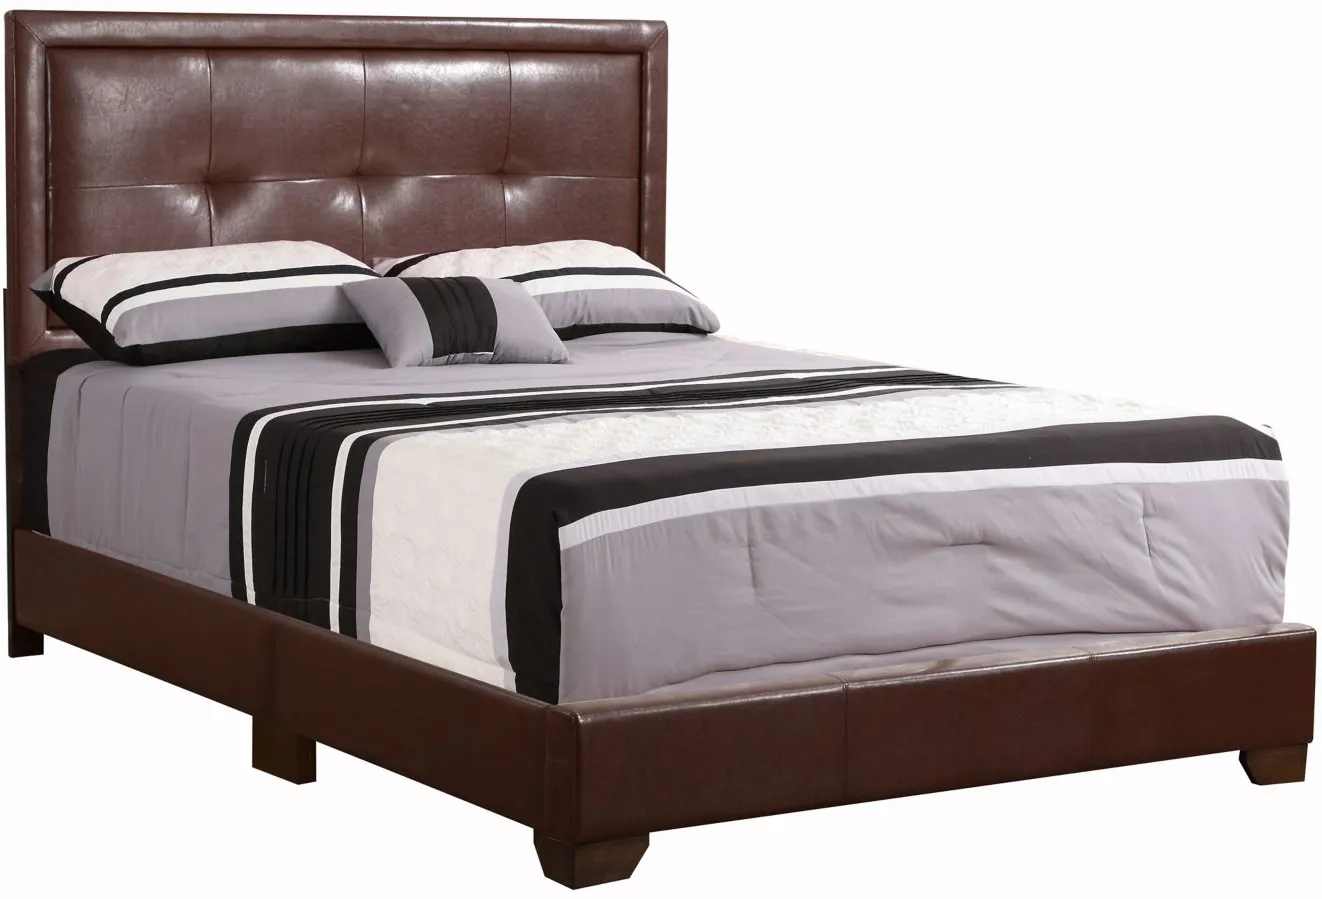 Panello King Bed in LIGHT BROWN by Glory Furniture